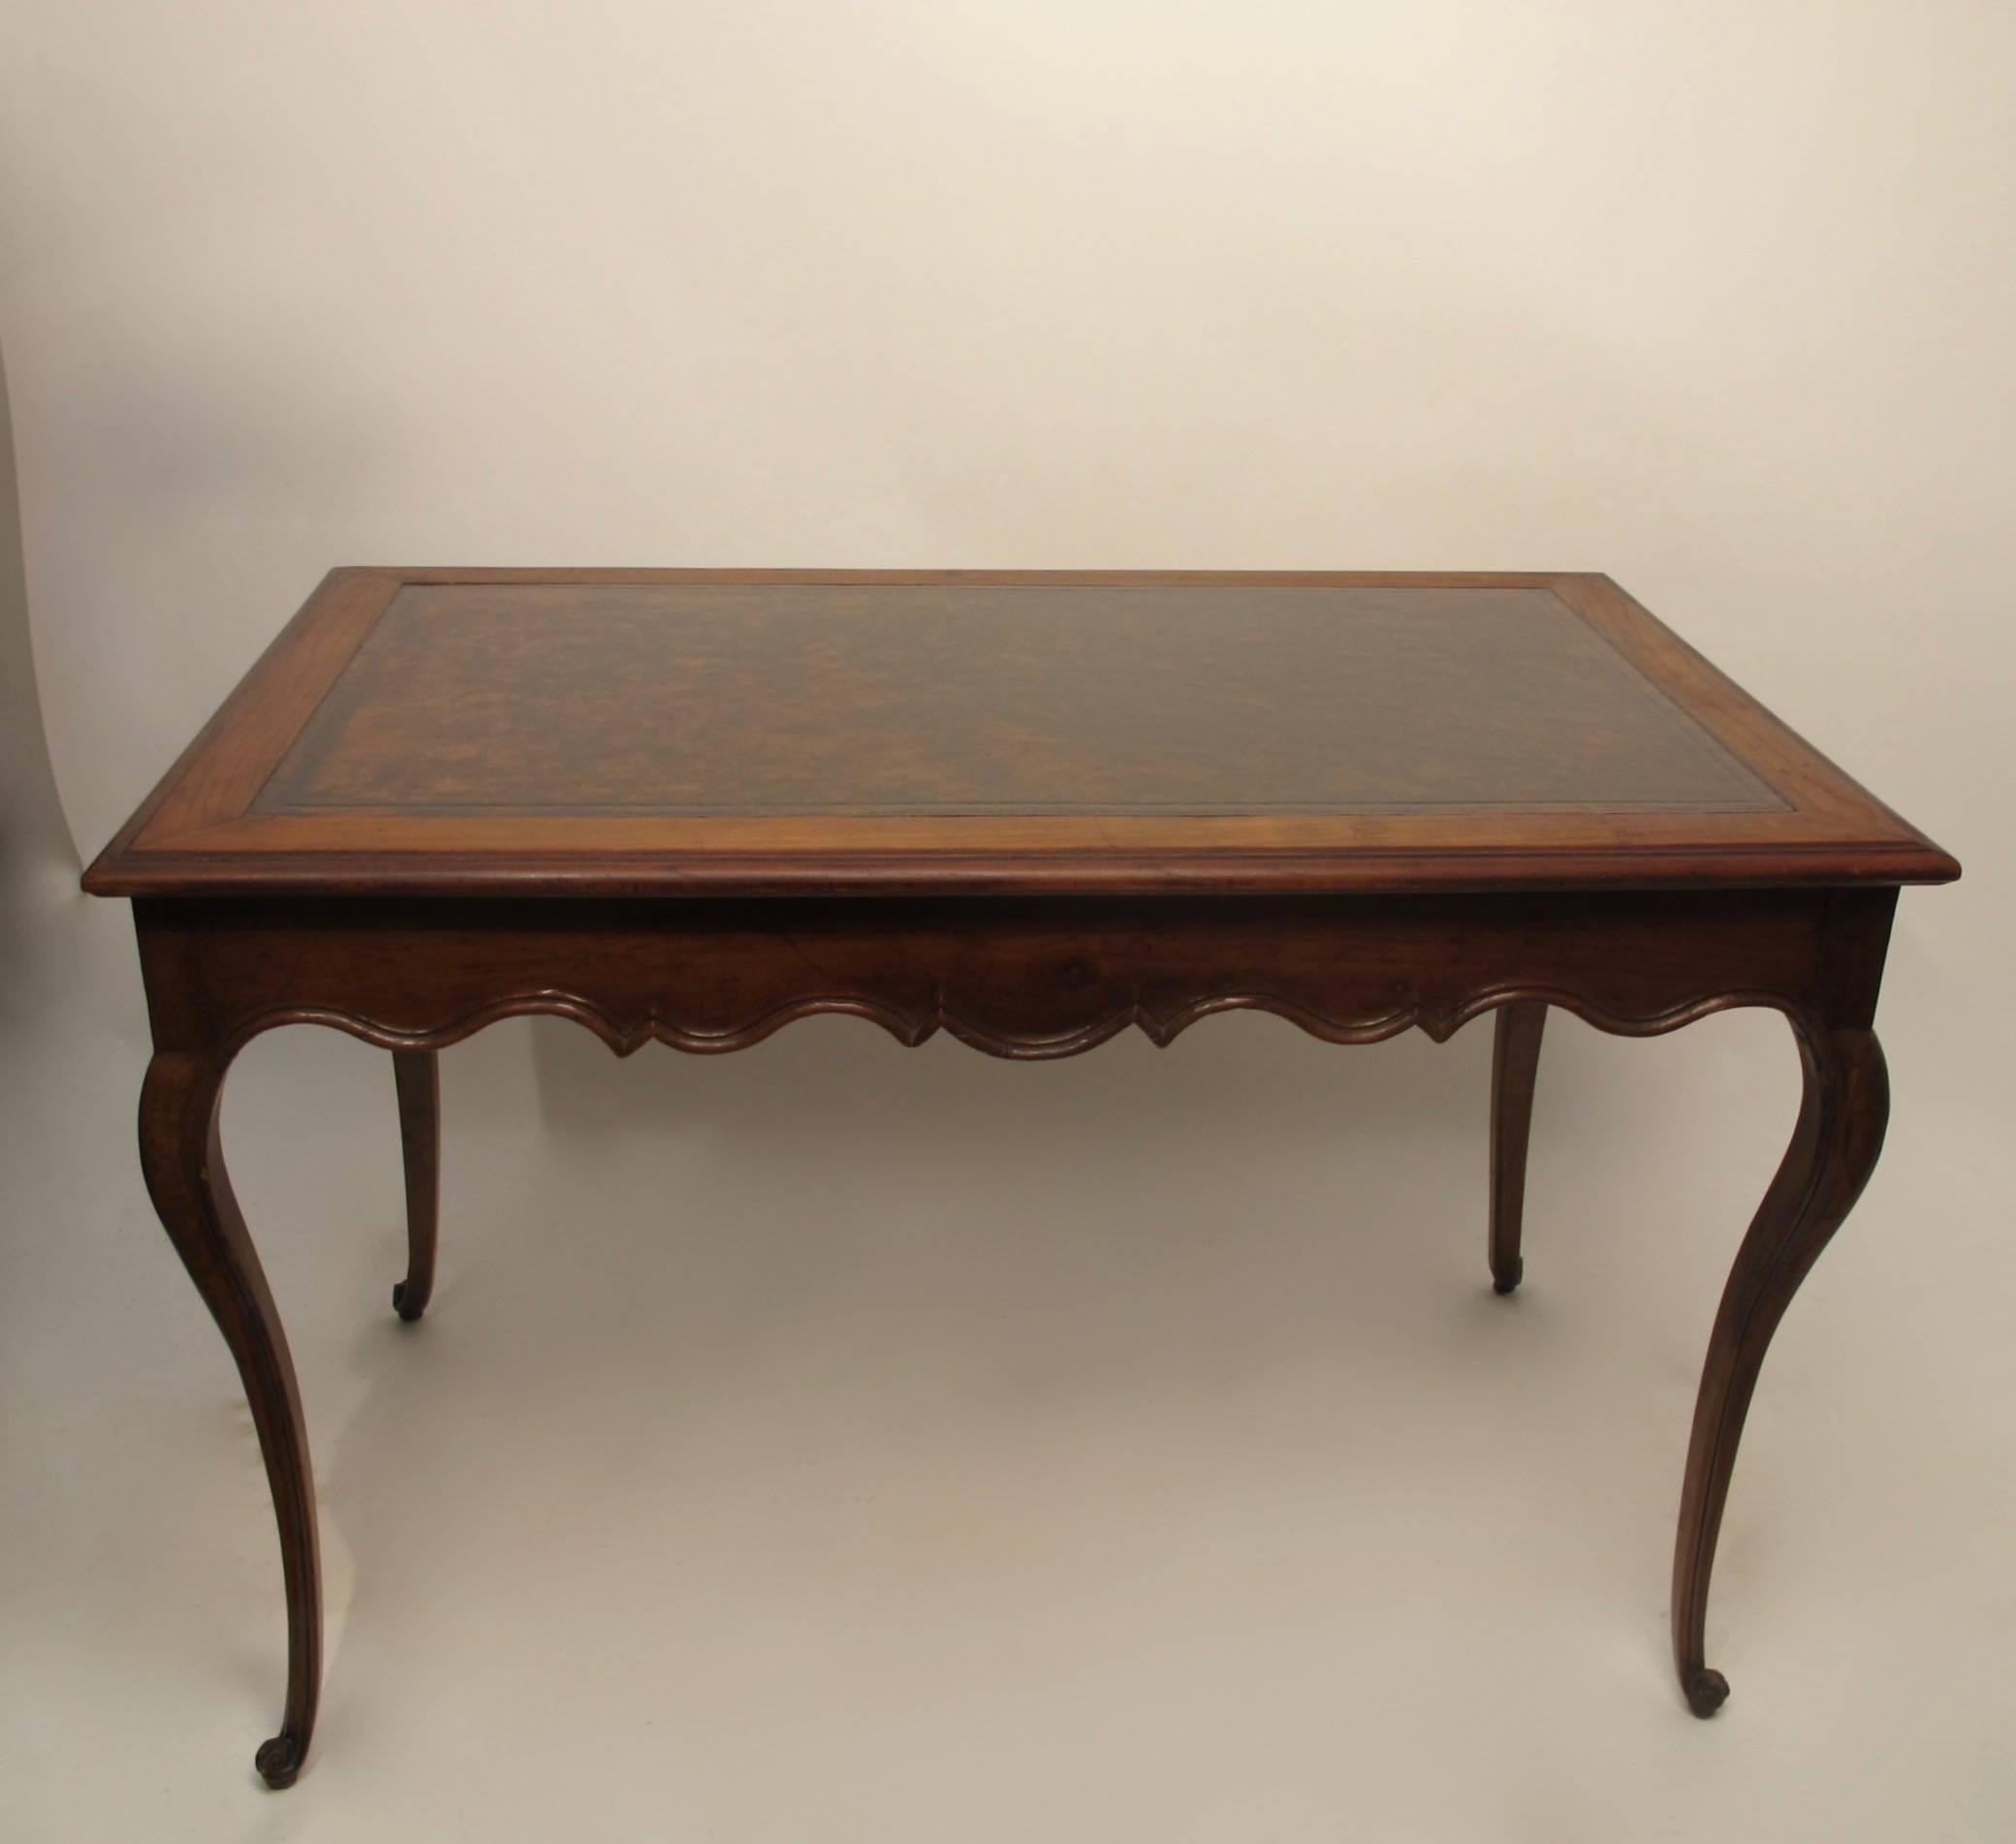 A graceful Louis XVI style carved walnut writing table with inset leather top, having a single drawer at one end. In beautiful condition.
France, circa 1760.